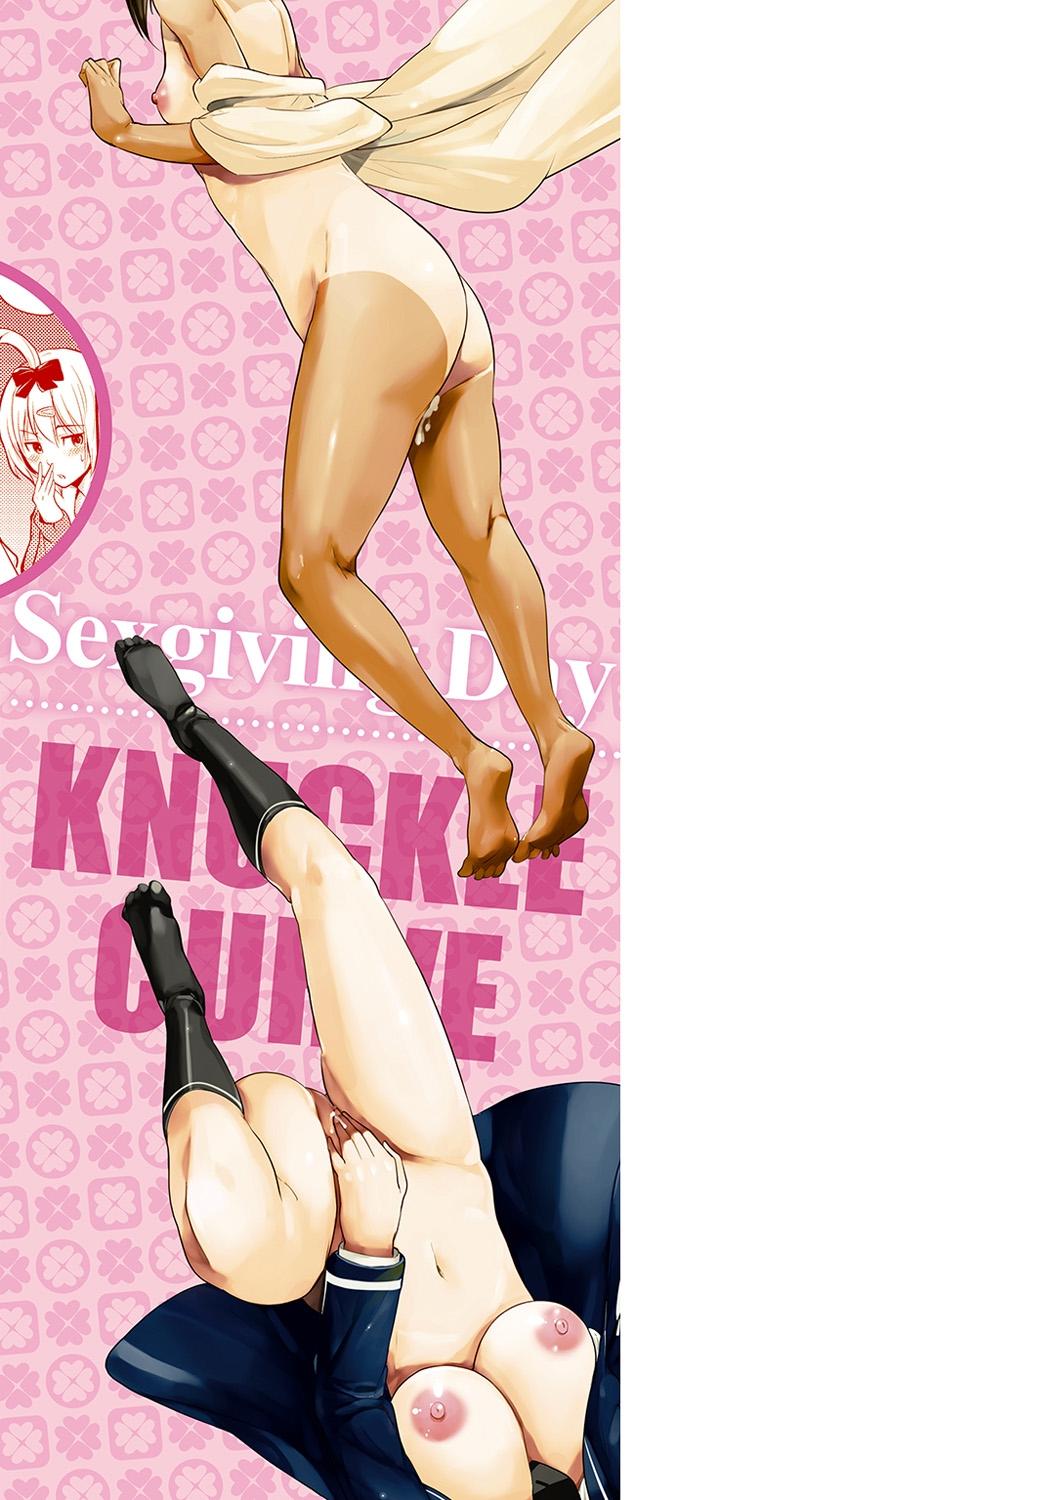 [Knuckle Curve] Onii-chan Kanshasai - Sexgiving Day [Digital] 224